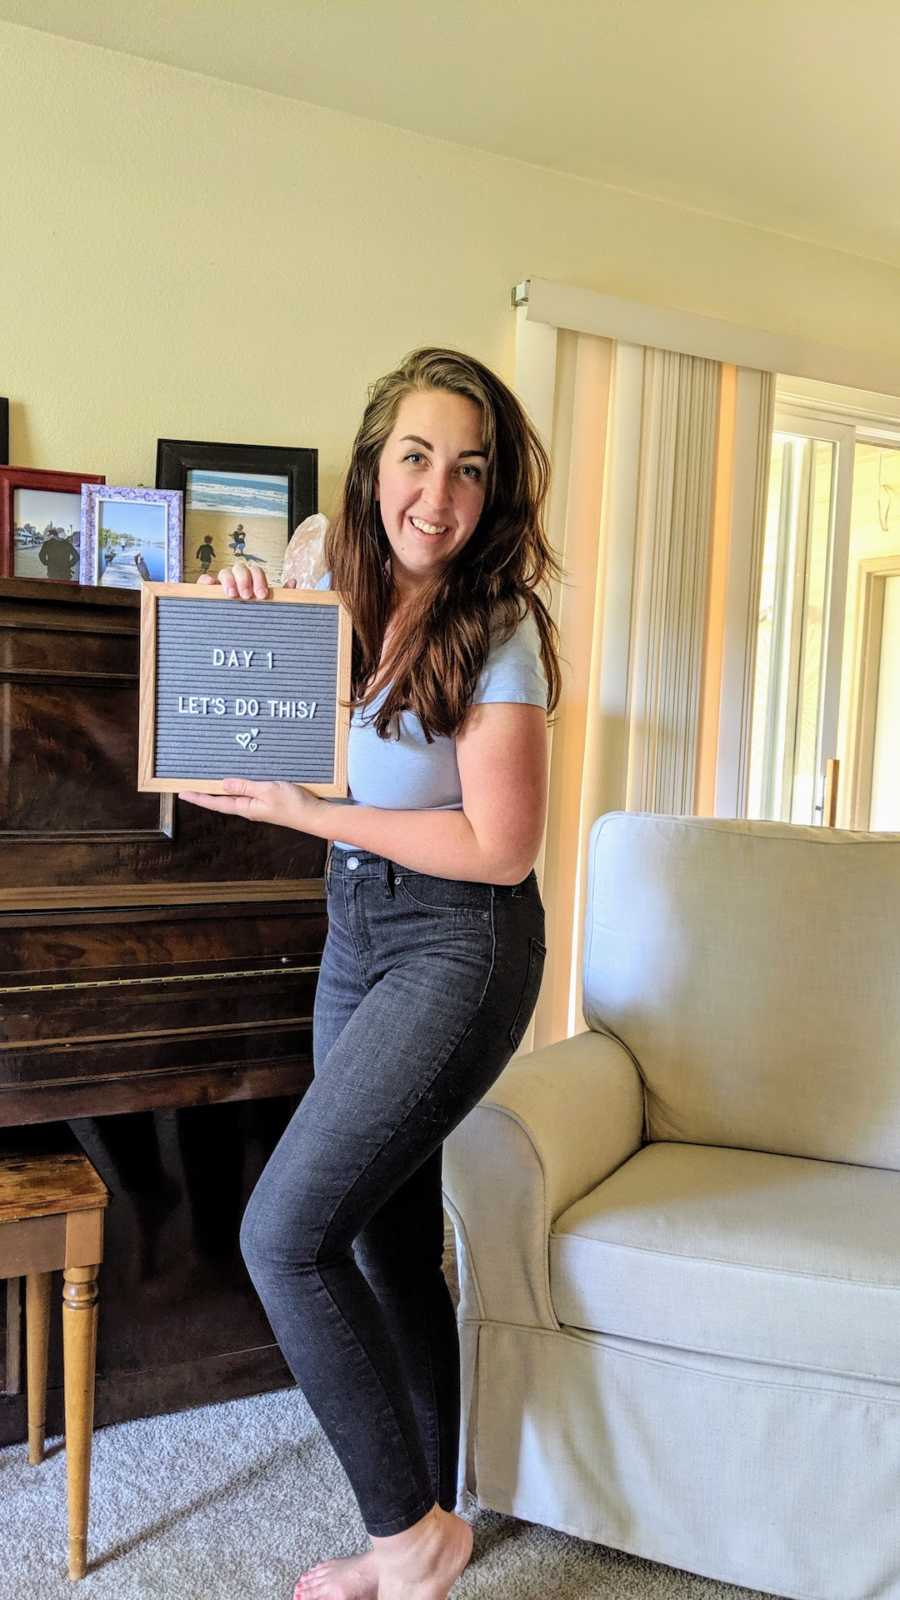 Woman holding letter board in living room and smiling